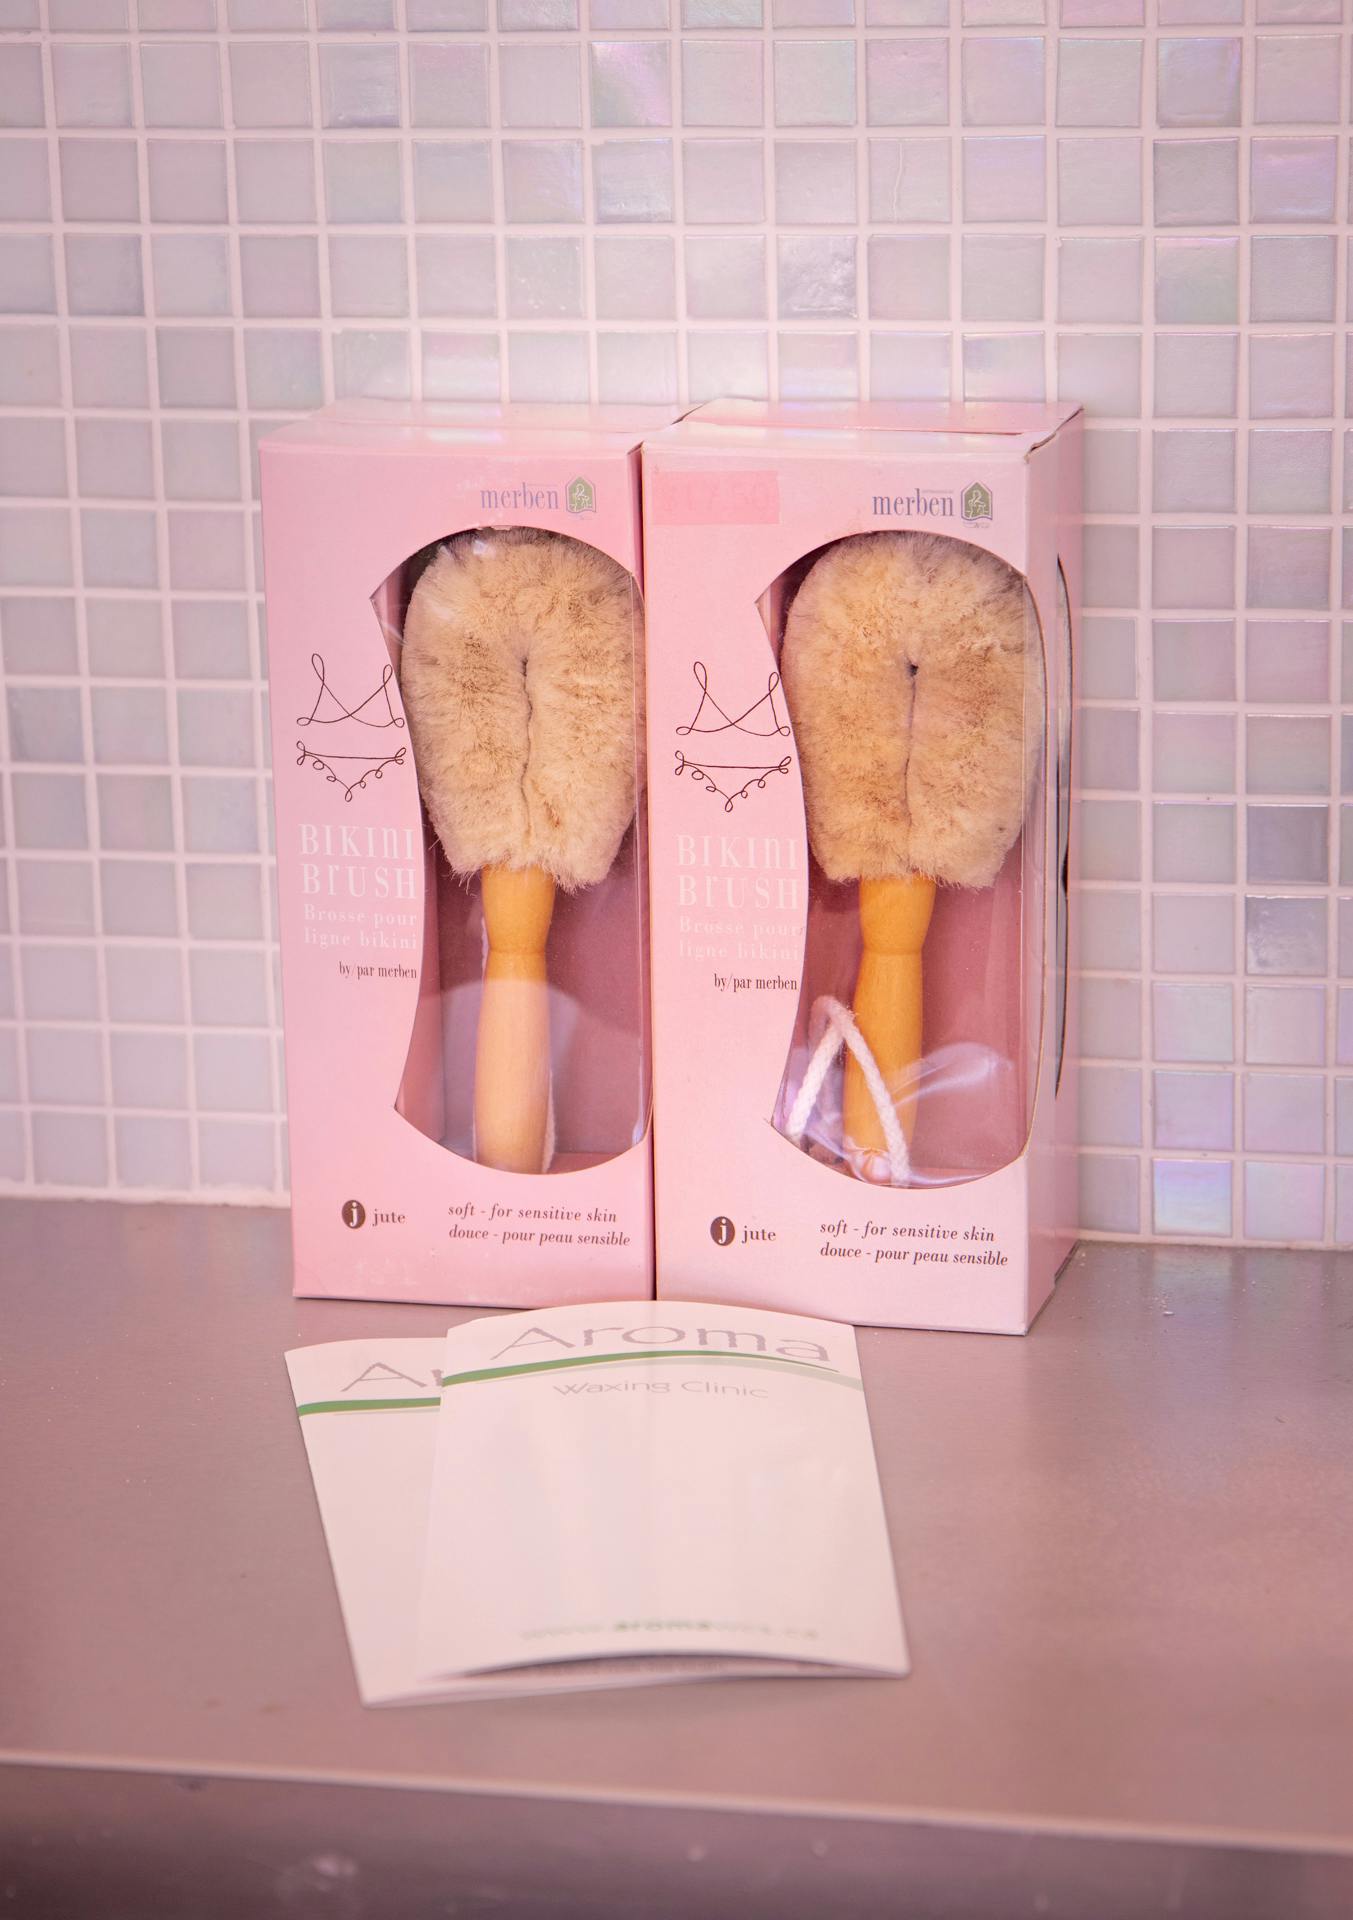 Merben Bikini Brushes in pink boxes on a counter